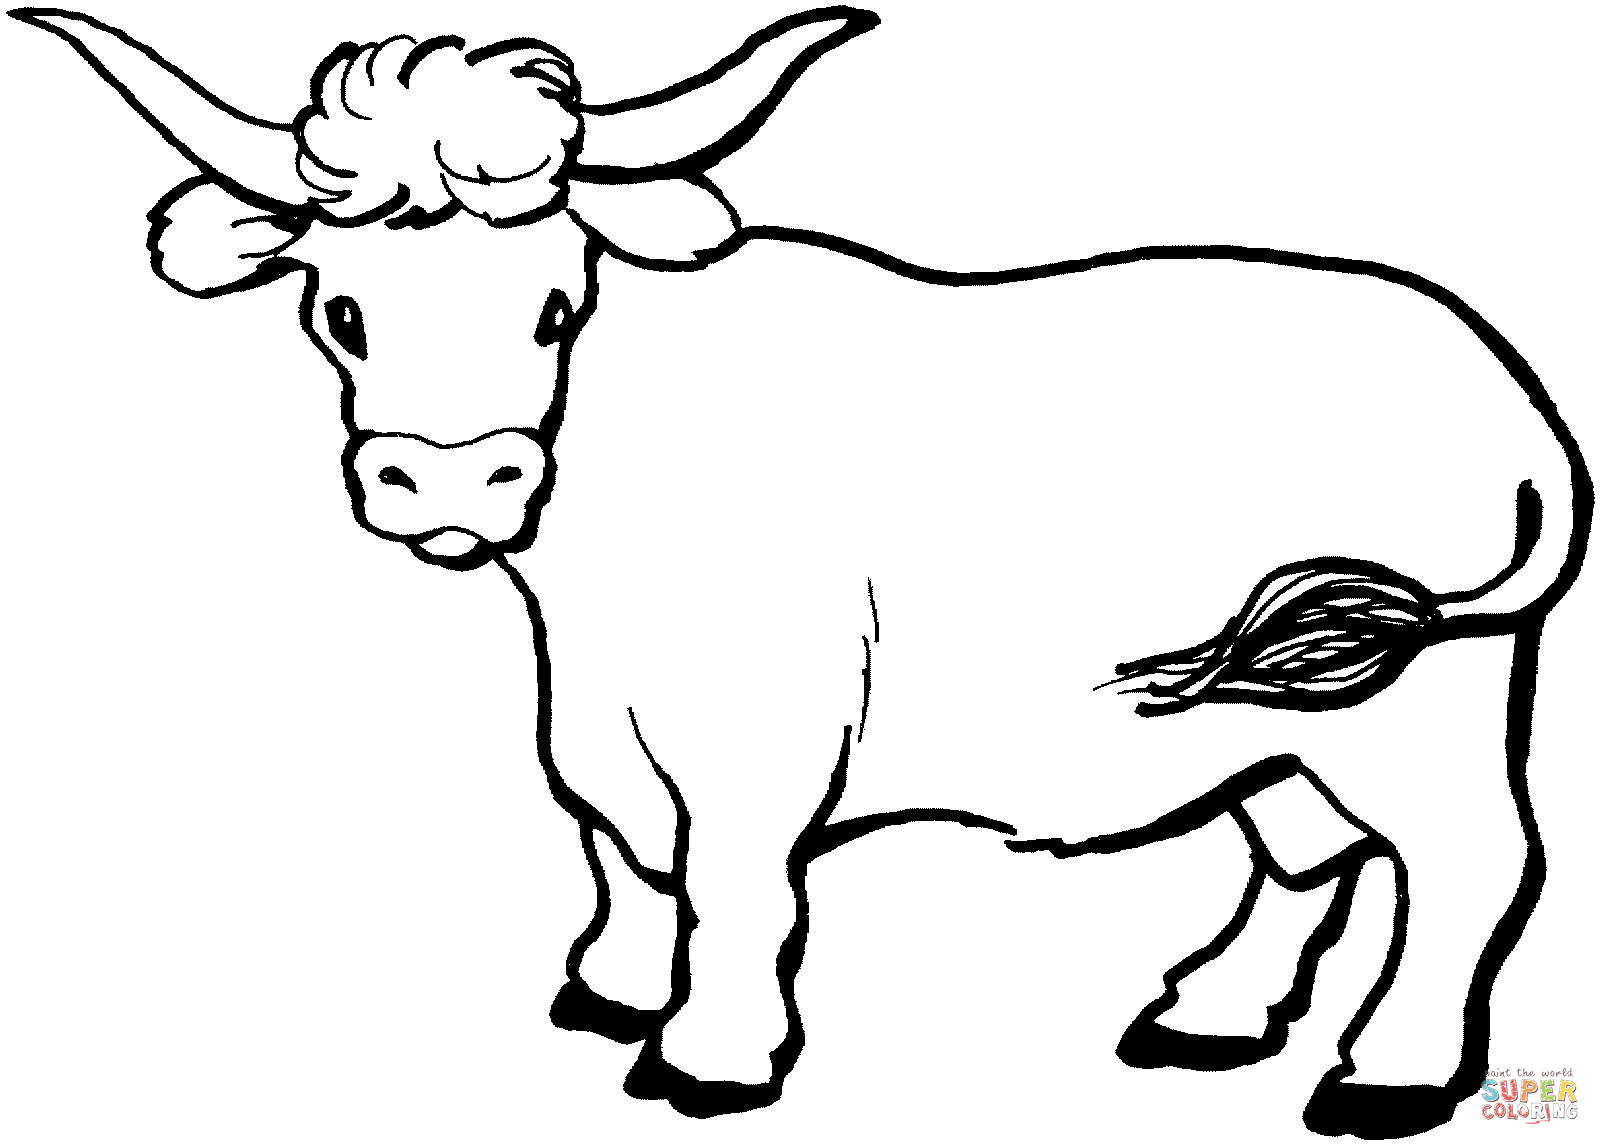 Cow 10 coloring page | Free Printable Coloring Pages